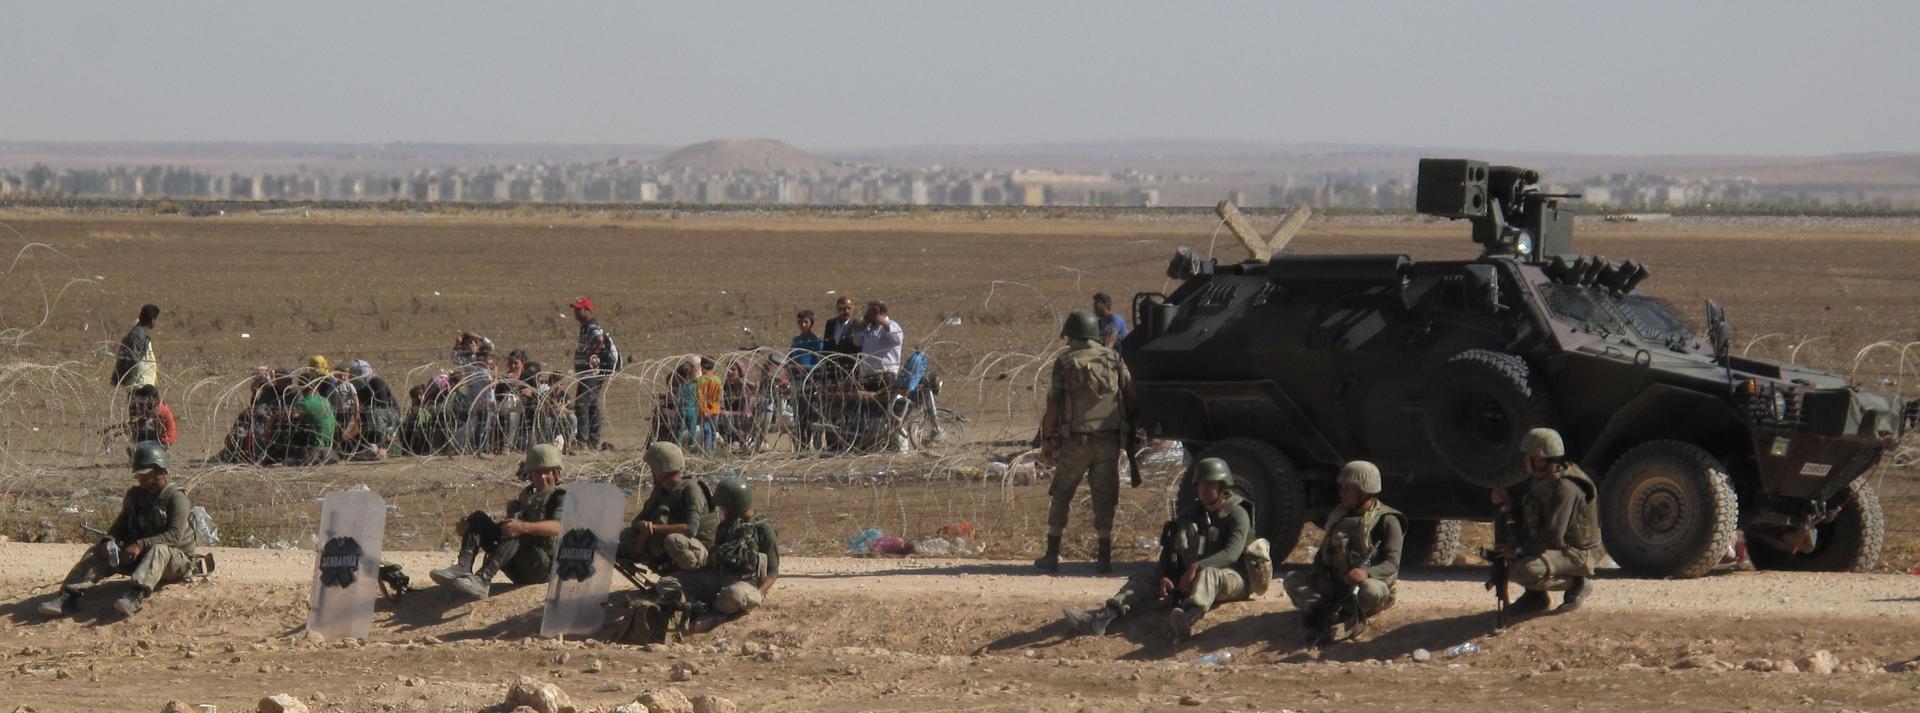 Scores of Syrian refugees from Kobane - under threat of capture by Islamic State - sit in the sun waiting to be allowed to cross into Turkey. Sept. 26, 2014. The outskirts of the village are visible in the background.